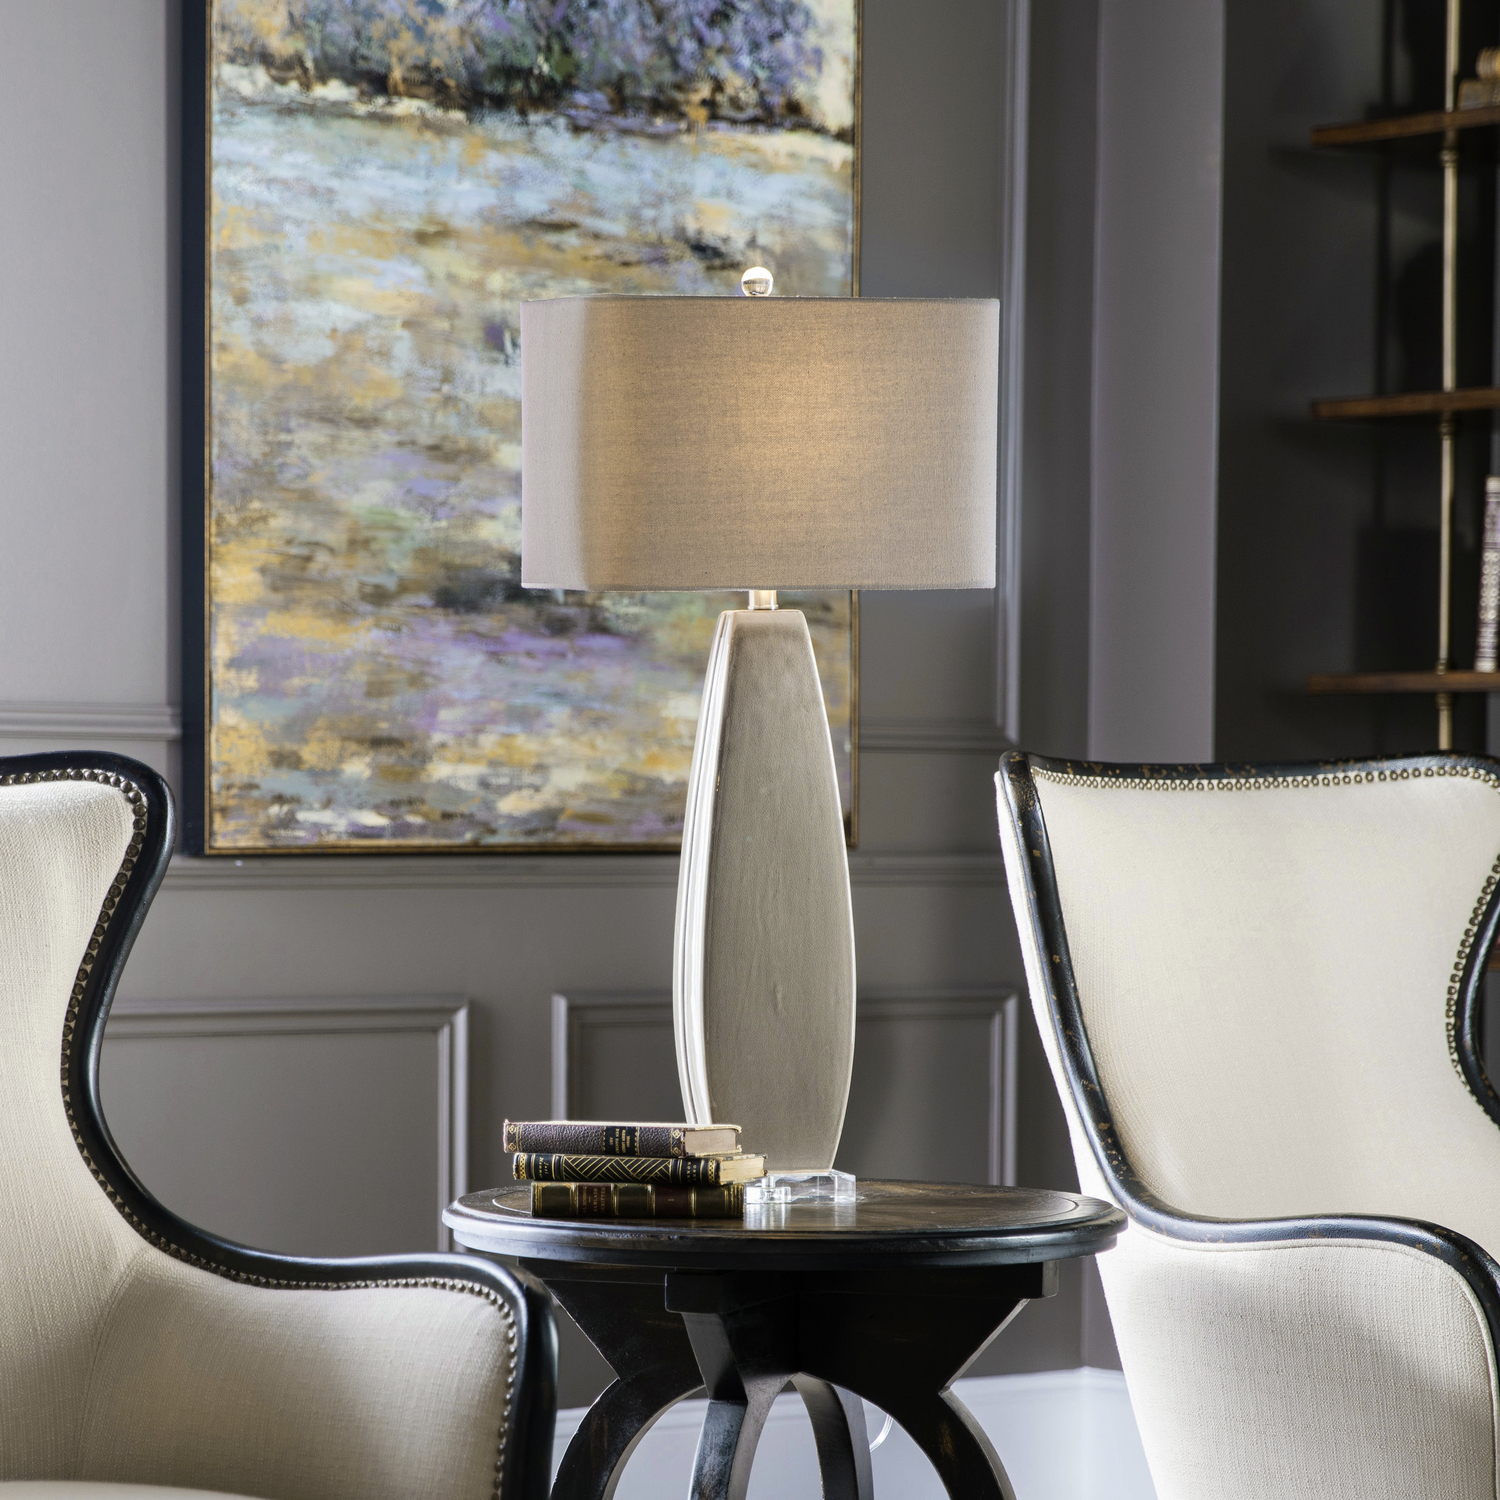  Uttermost Charcoal Lamp Table Lamps This Ceramic Base Hints At A Mid-century Modern Inspired Shape, Finished In A Worn Charcoal With Natural Distressing Caused From The High Fired Reactive Glaze, Accented With Thick Crystal Details.